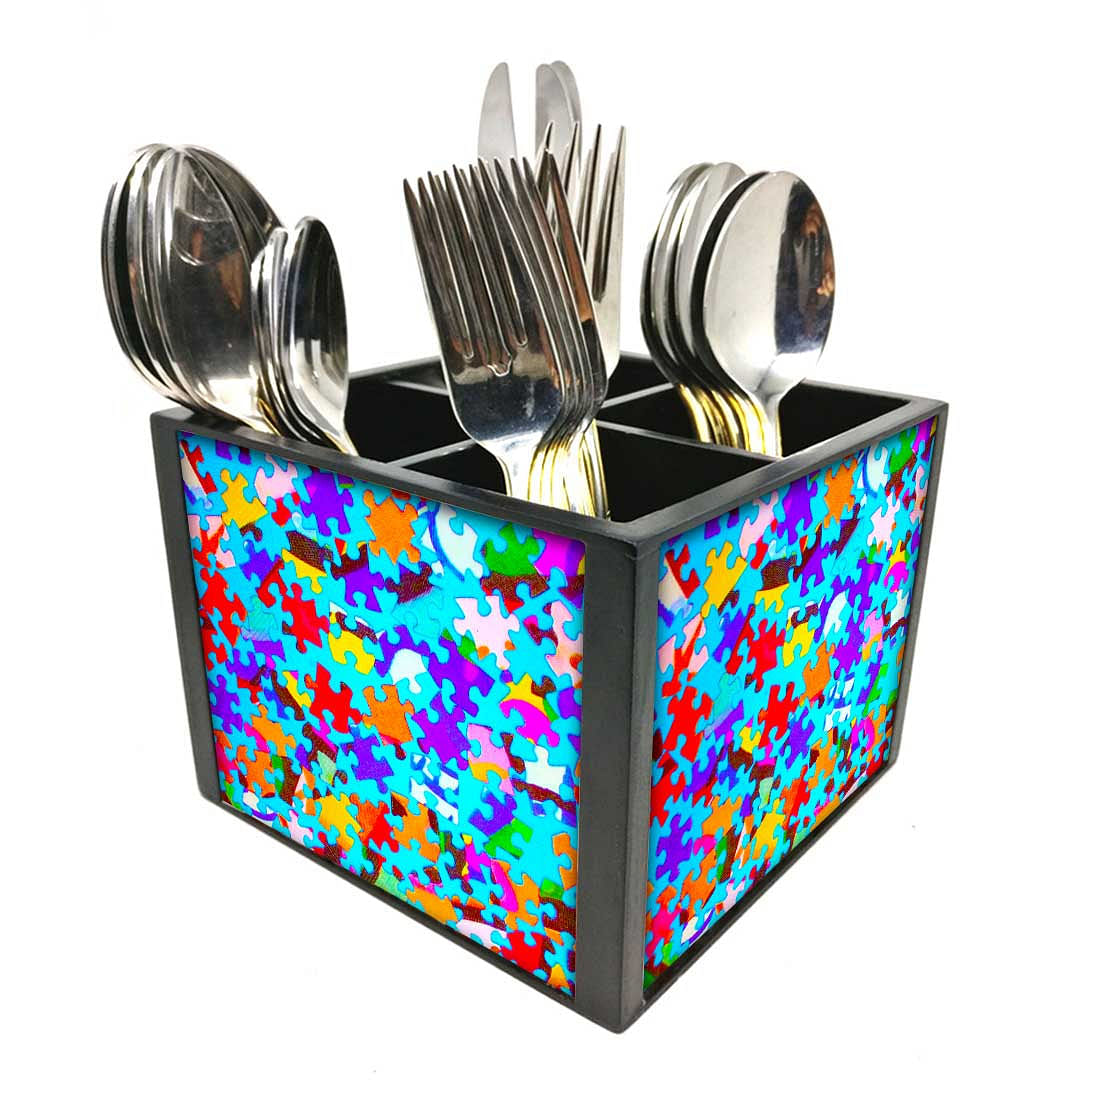 Puzzle Cutlery Holder Stand Silverware Caddy Organizer for Spoons, Forks & Knives-Made of Pinewood Nutcase